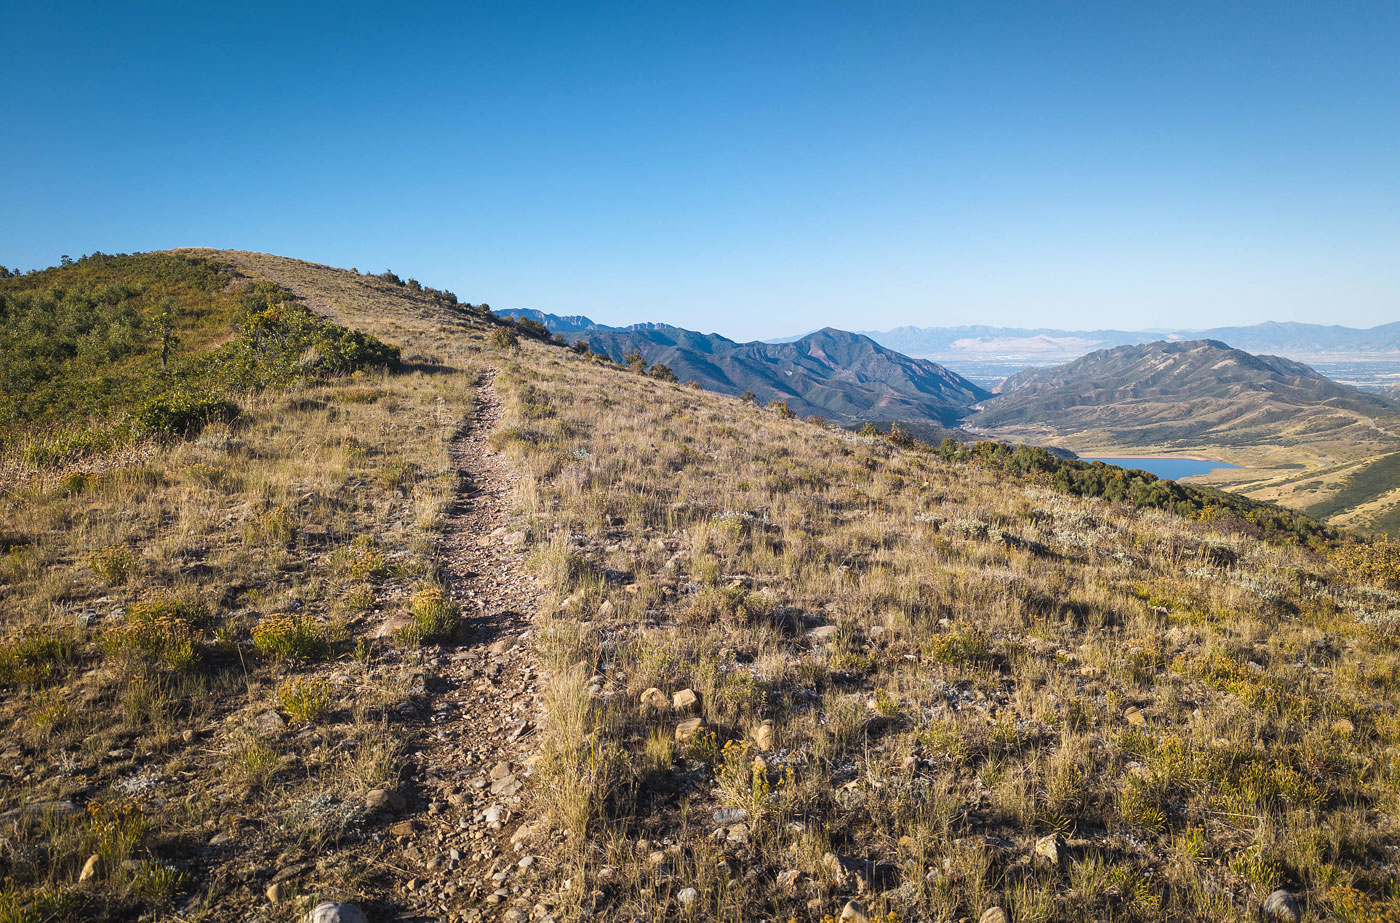 Hike Bald Mountain via Great Western Trail in Uinta-Wasatch-Cache National Forest, Utah - Stav is Lost